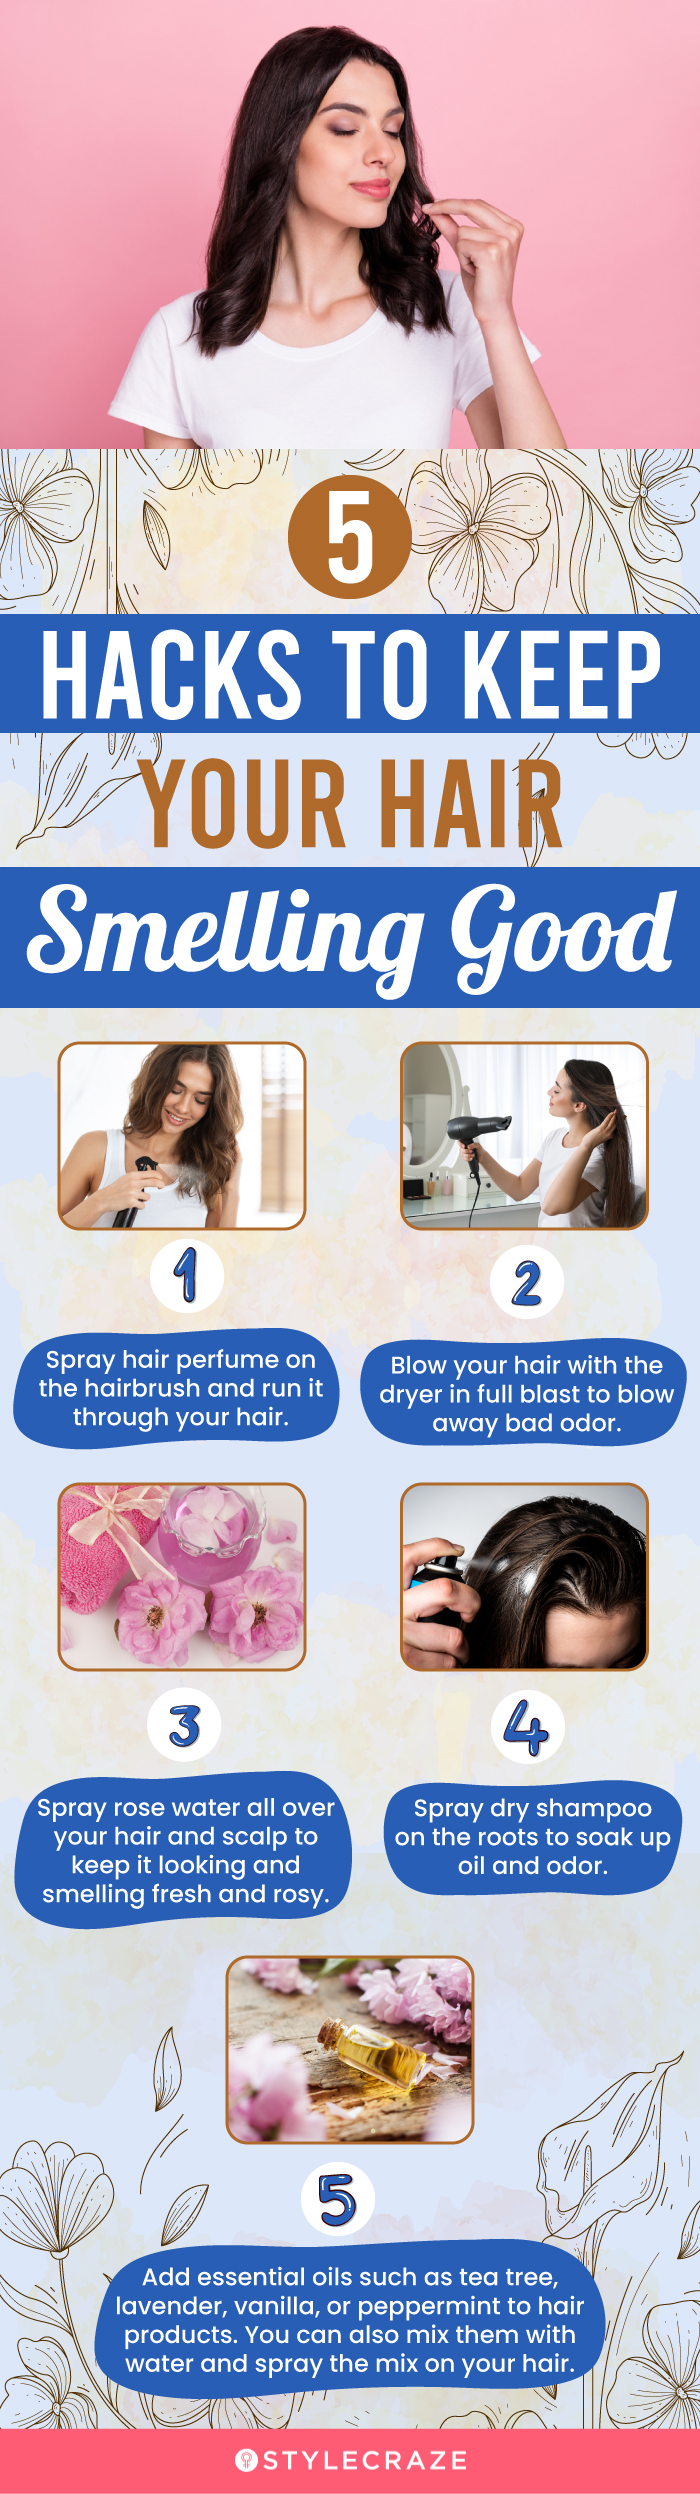 Hacks To Keep Hair Smelling Good Always (infographic)